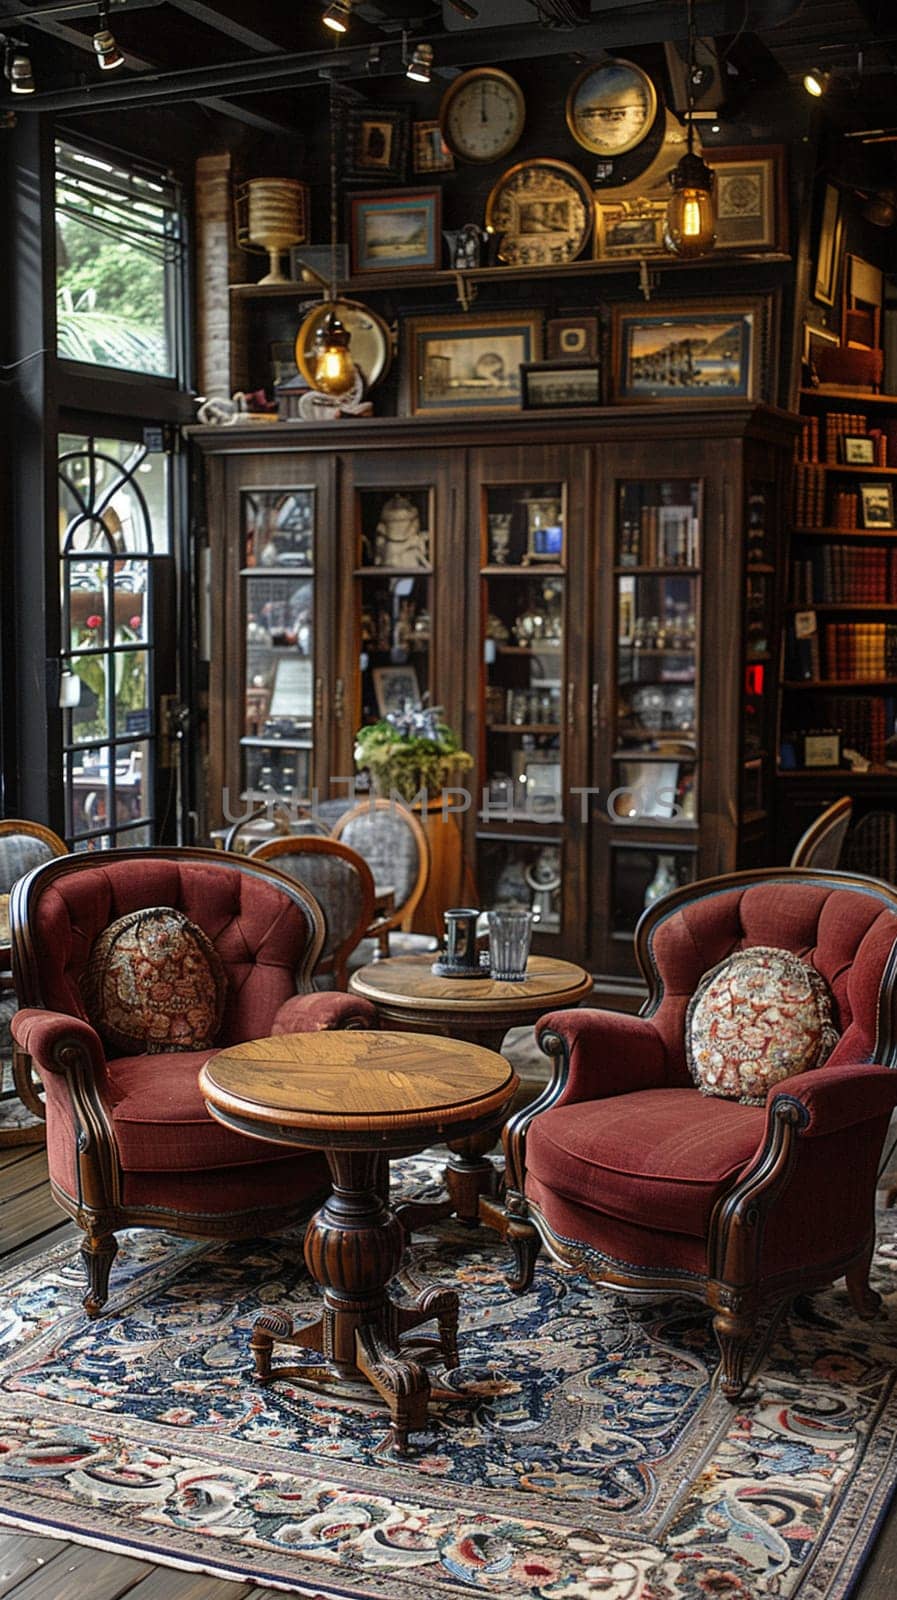 Antique Furniture Shop Curates History in Business of Vintage Decor, Chairs and tables arrange a scene of elegance and nostalgia in the business of antiques.